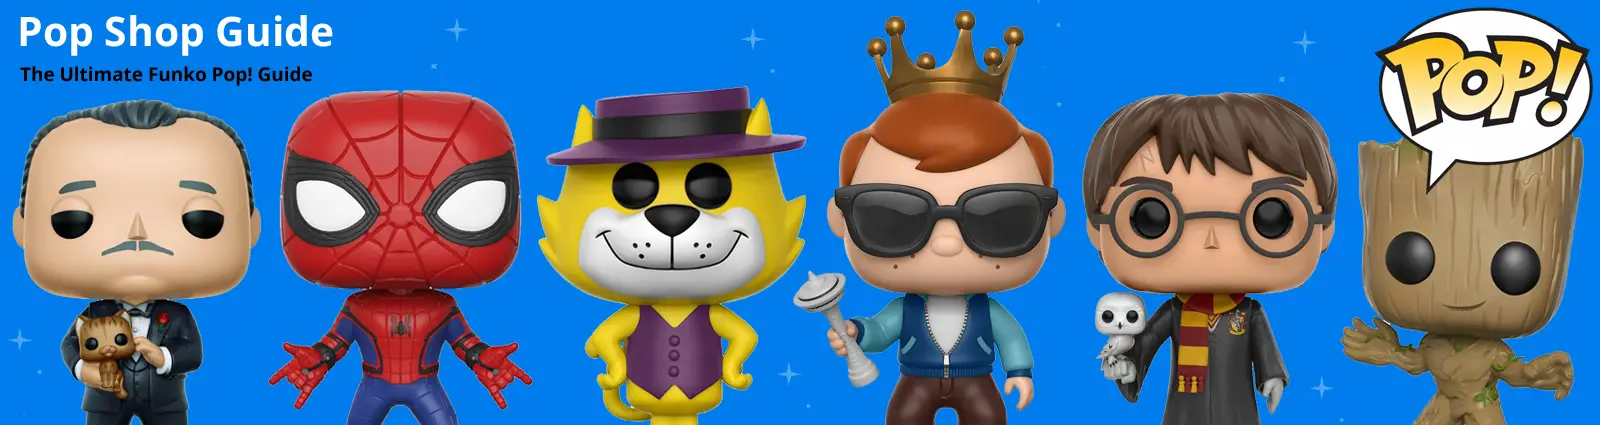 Welcome to Pop Shop Guide - The Ultimate Funko Pop! Guide